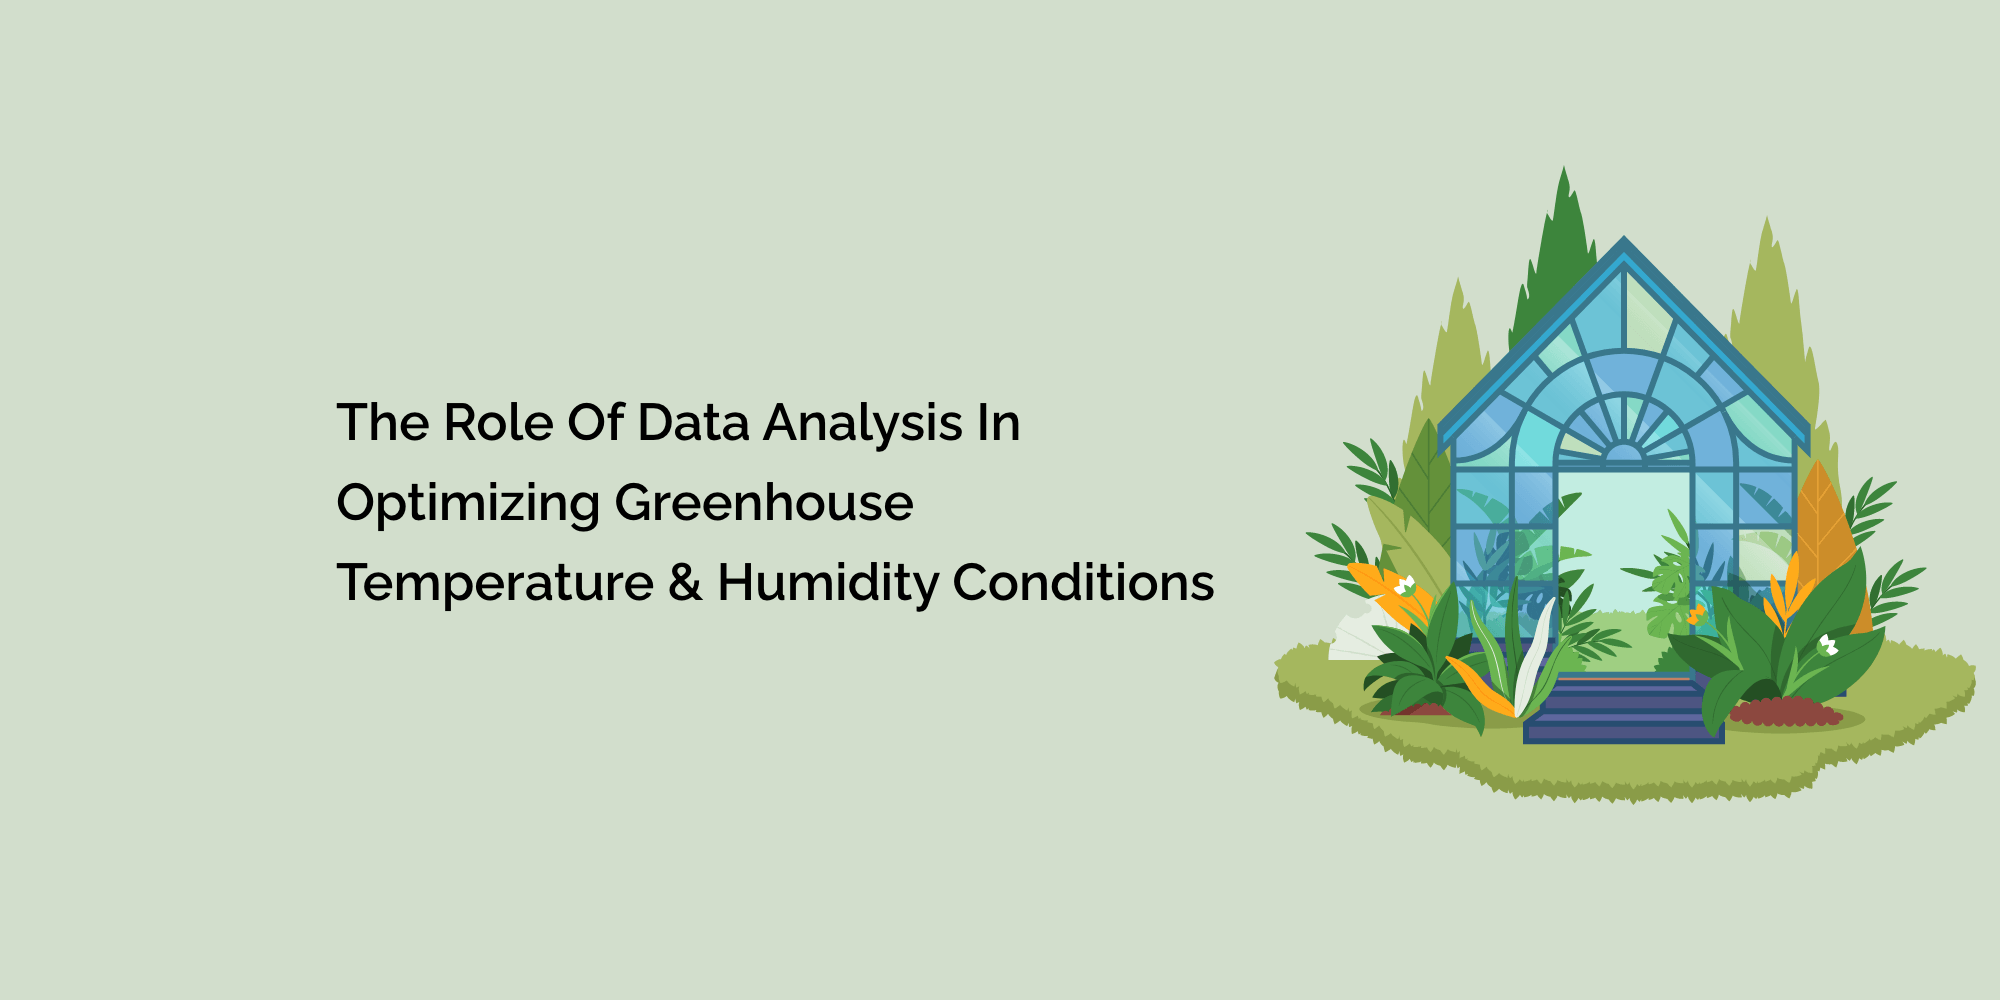 The Role of Data Analysis in Optimizing Greenhouse Temperature & Humidity Conditions